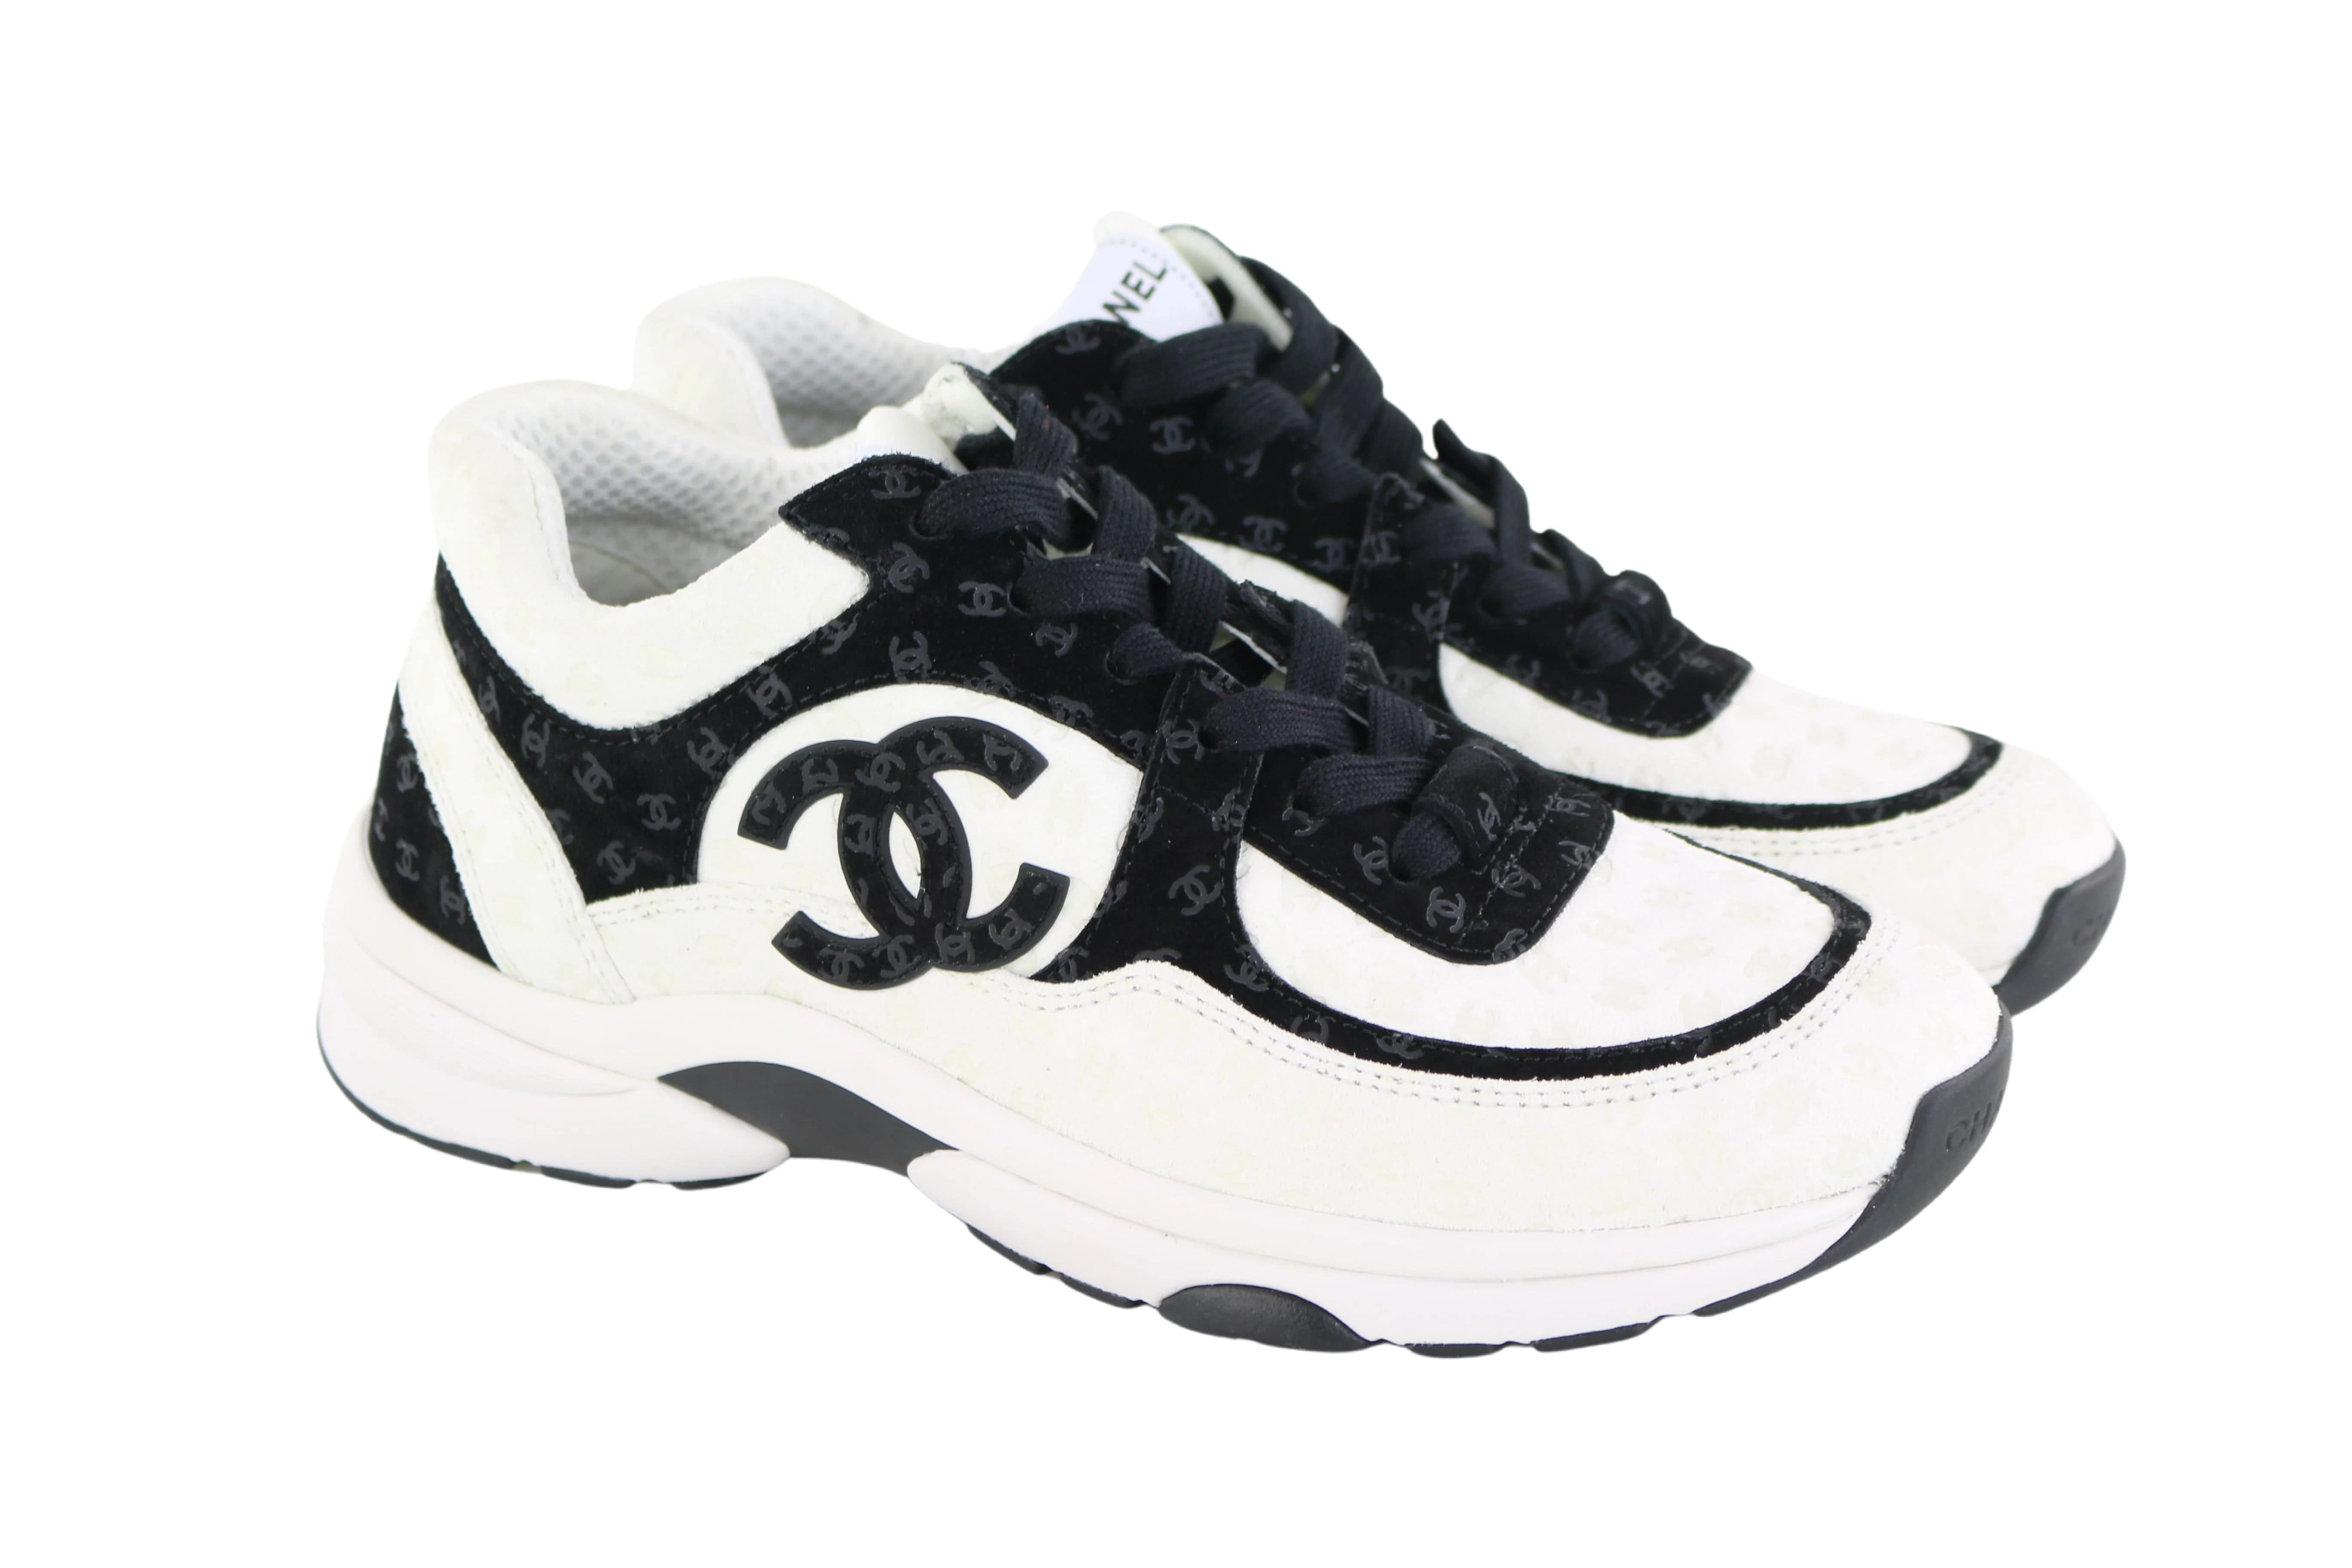 Chanel is also targeting the sneaker market